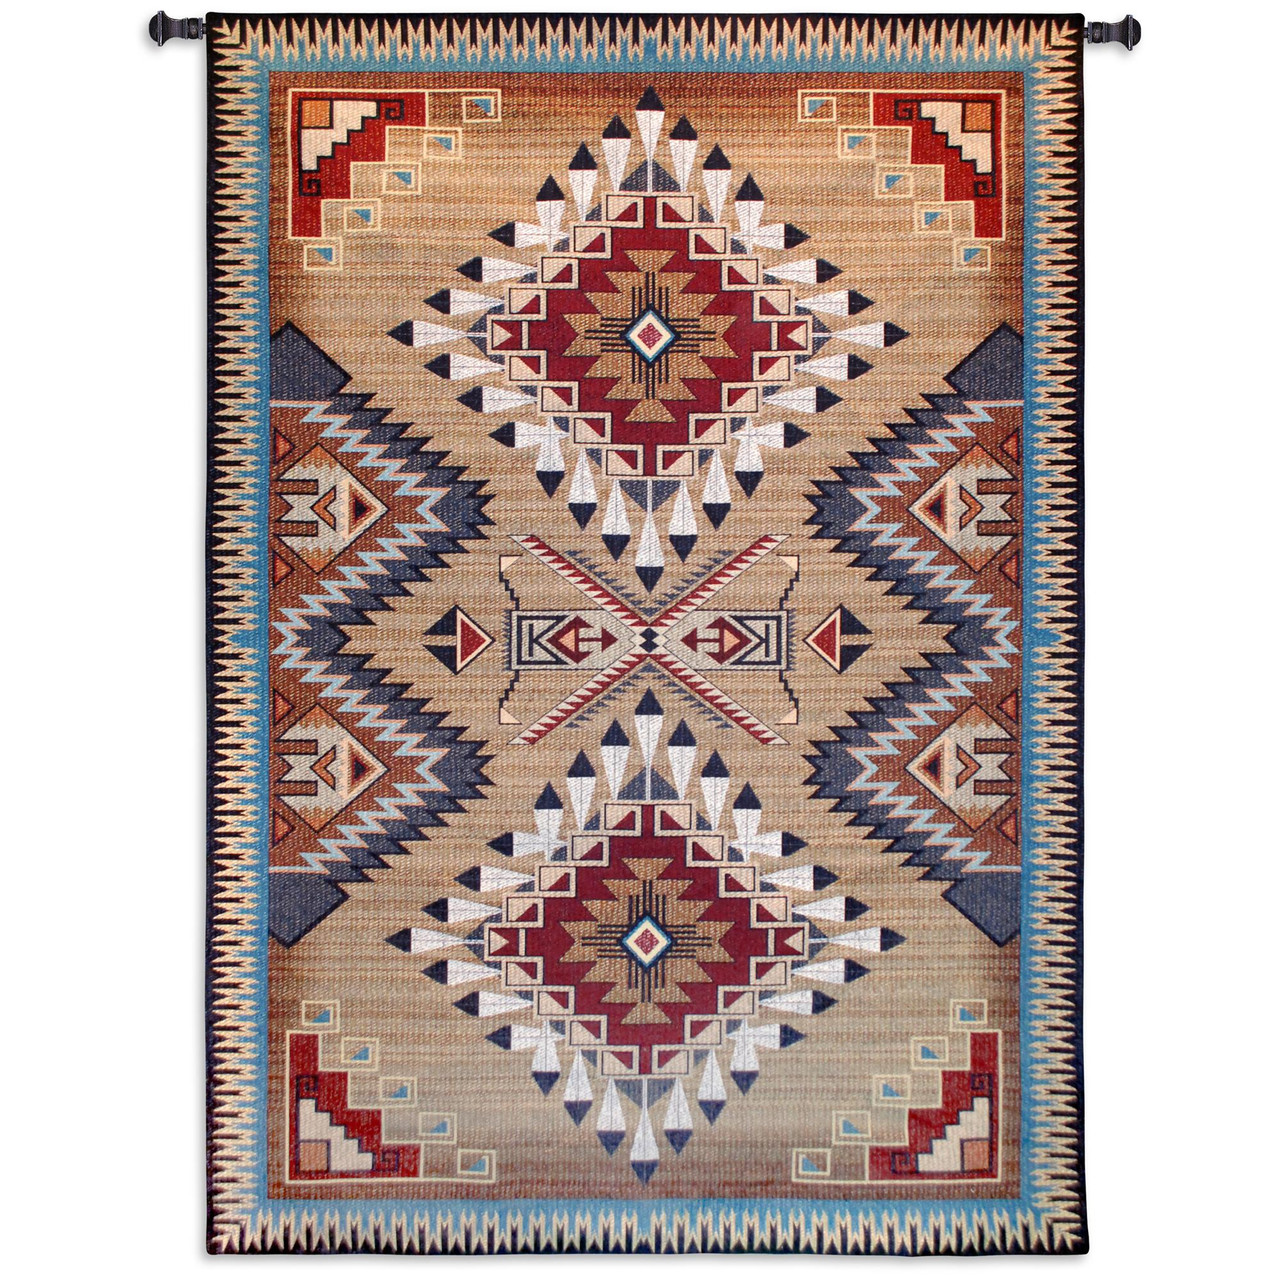 Brazos Tapestry Woven Tapestry Wall Art Hanging Rustic Native American Inspired Geometric Design 100 Cotton Usa Size 76x53